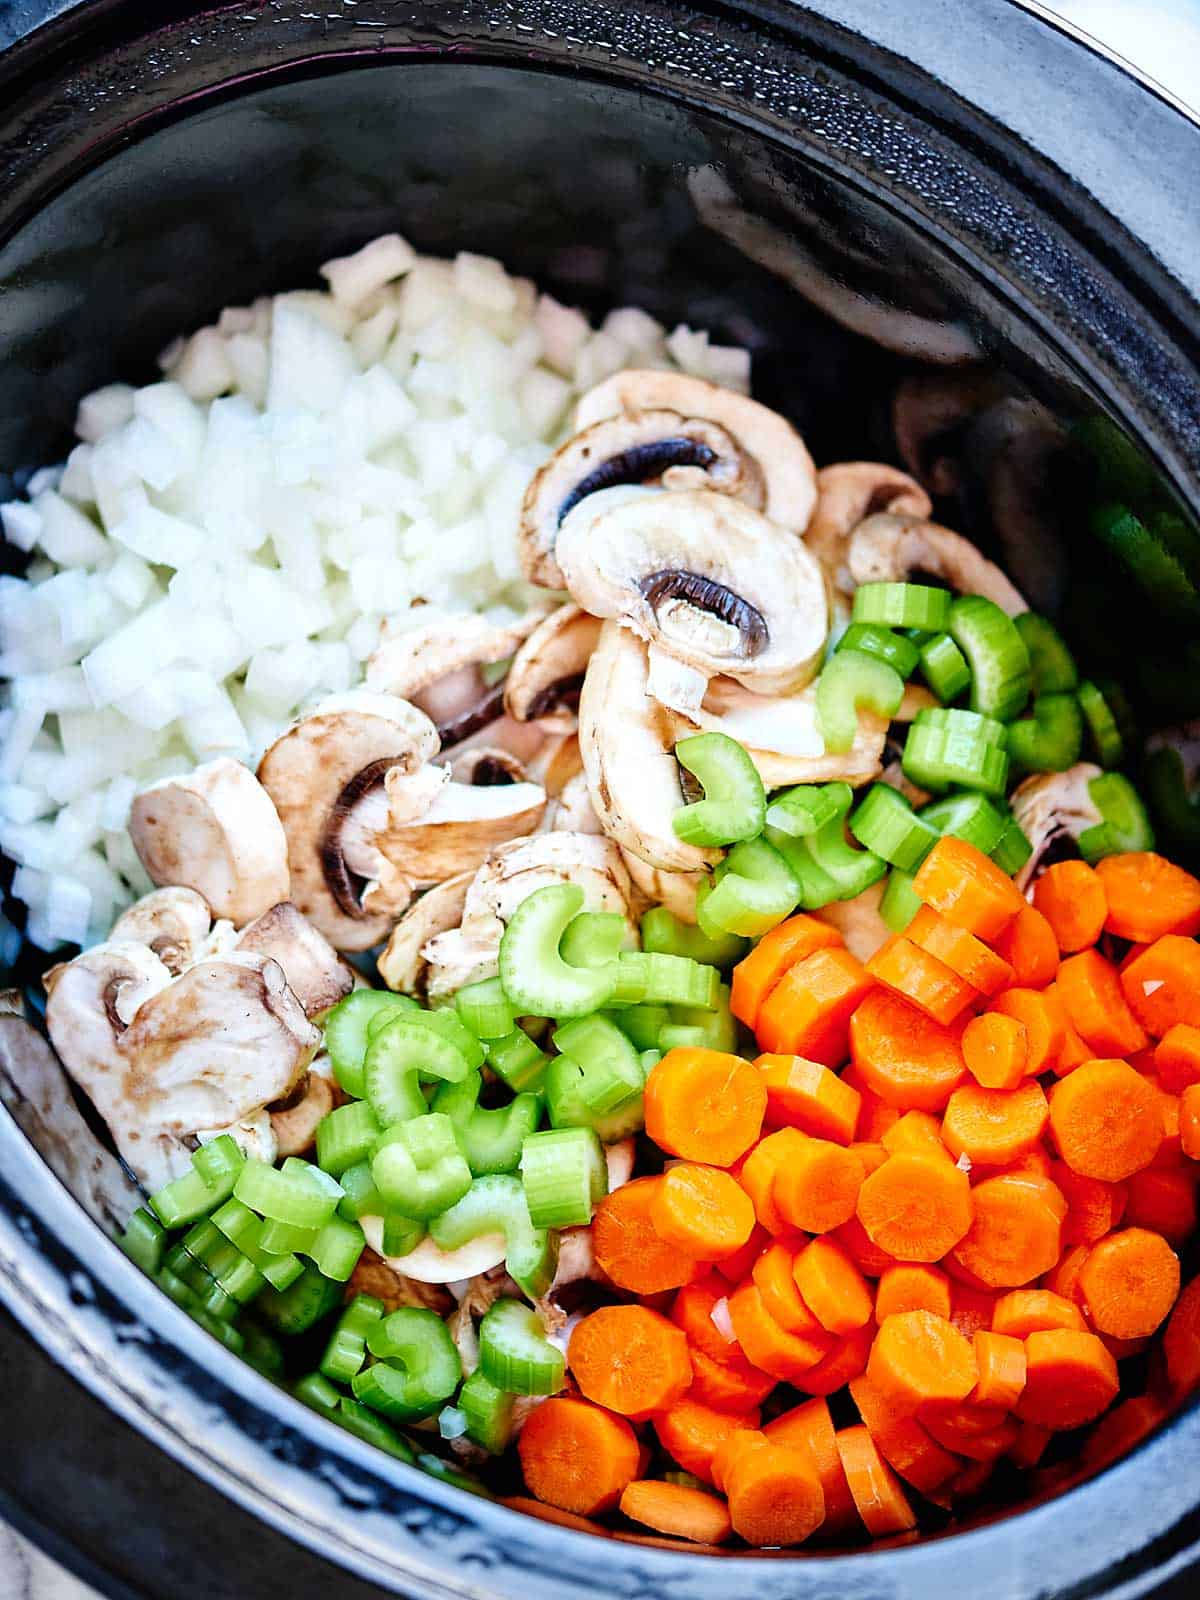 Crockpot Chicken Wild Rice Soup - Easy, Healthy, and Creamy!